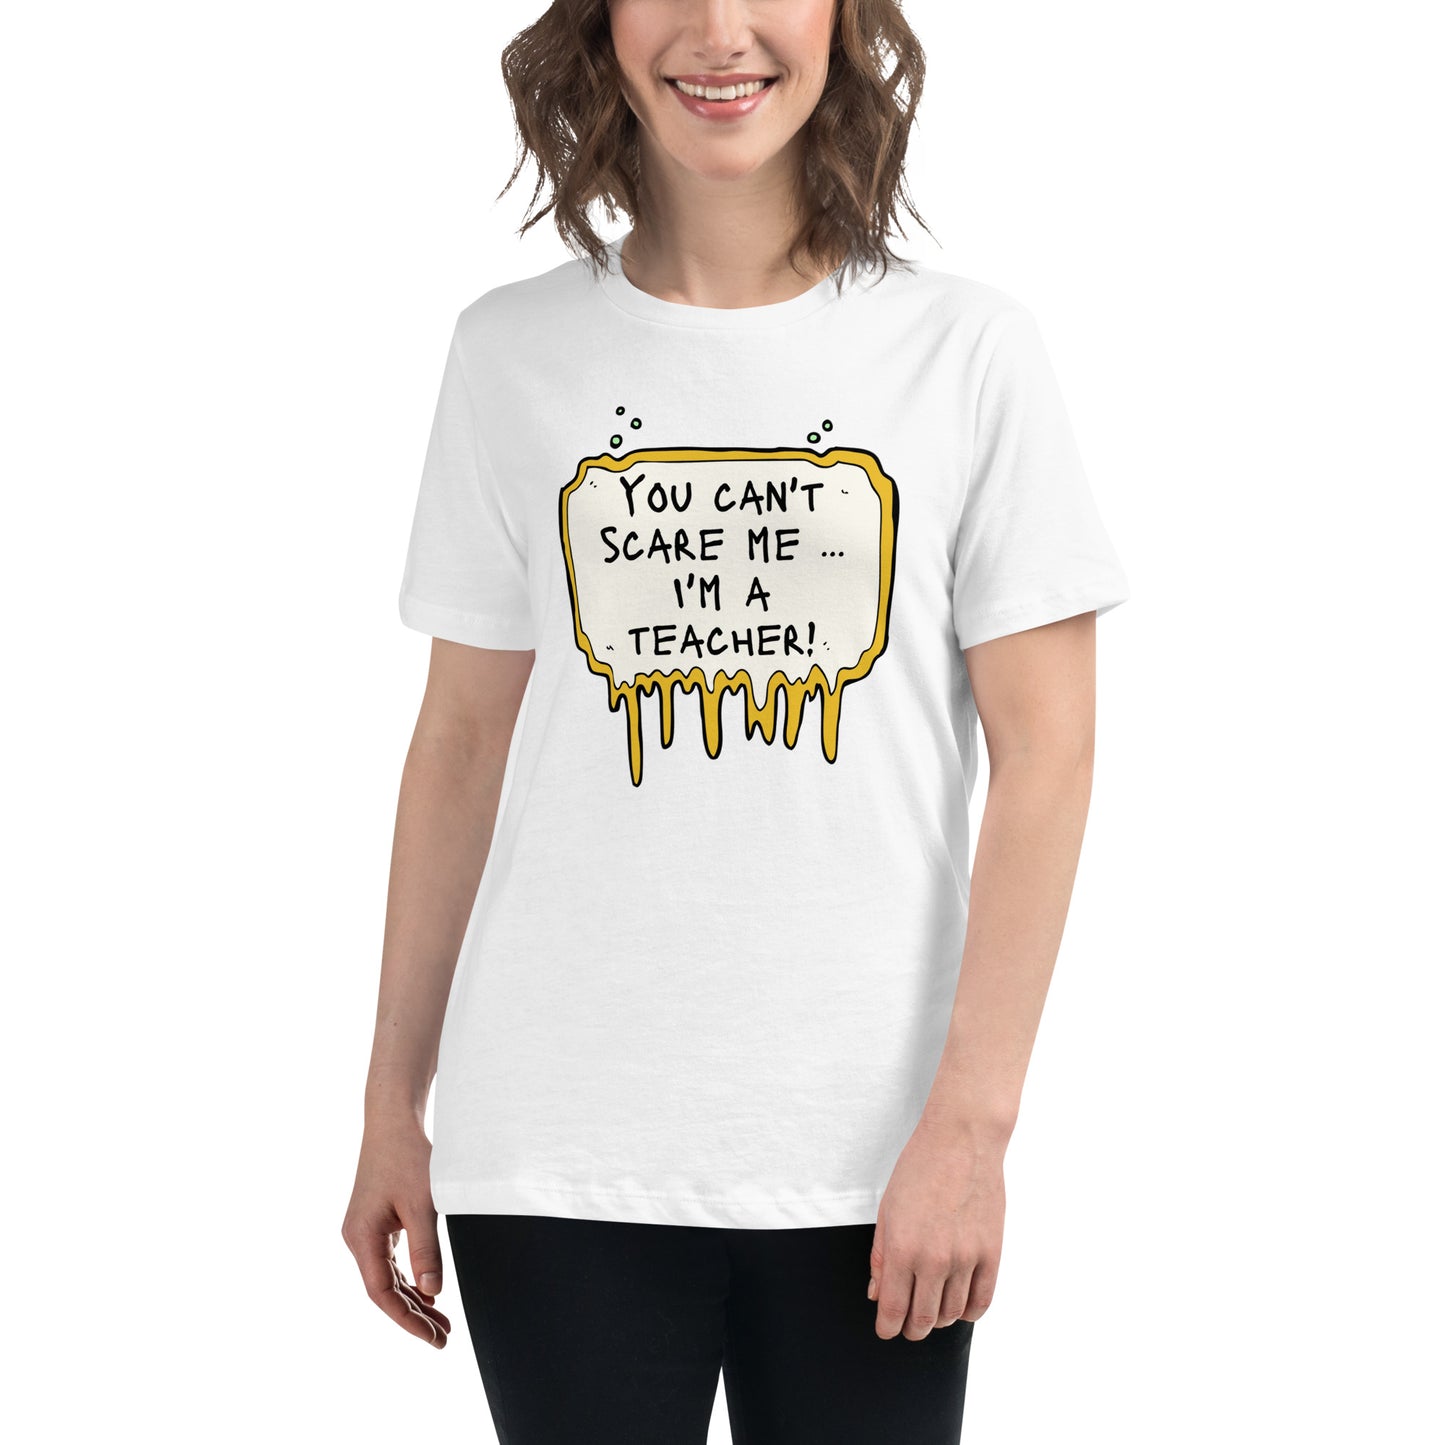 "You Can't Scare Me i'm a Teacher" - Women's Relaxed T-Shirt